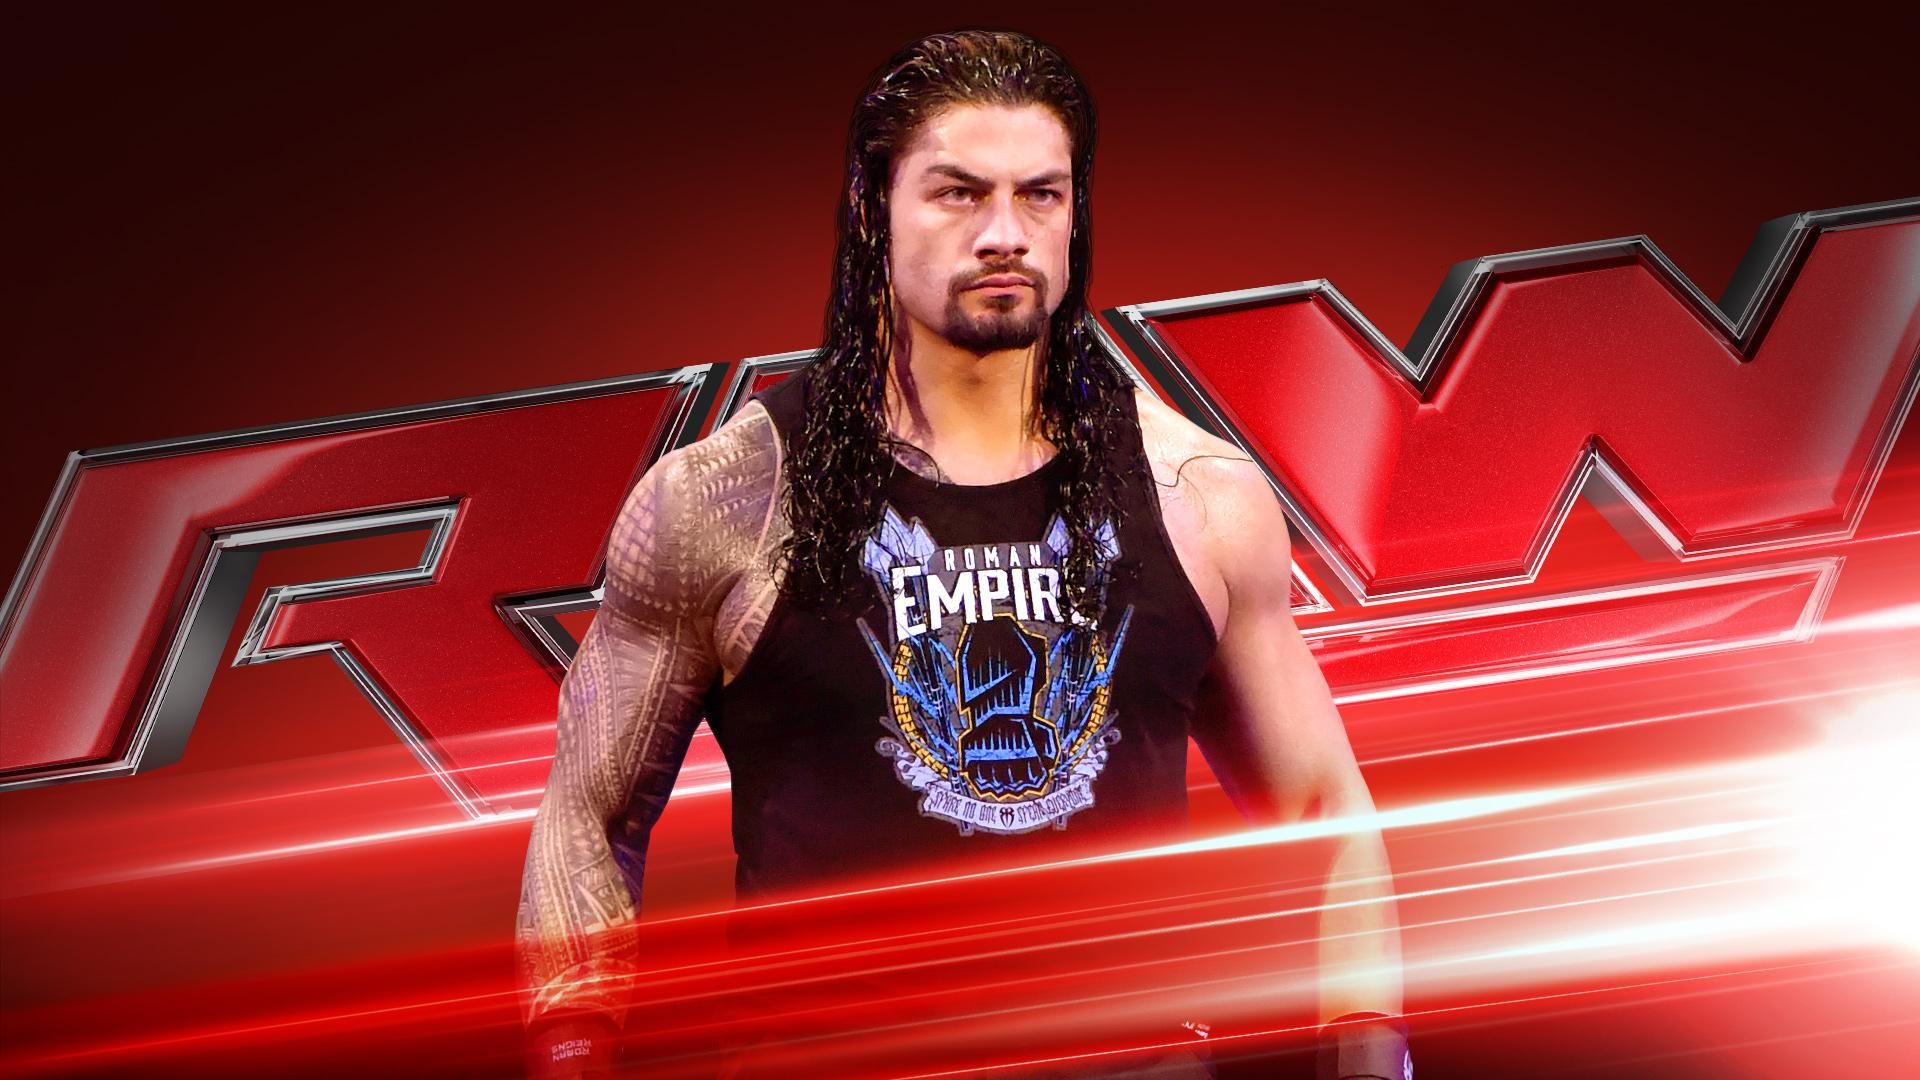 1920x1080 WWE Monday Night Raw Preview for 03.21.2016: Roman Reigns Confronts HHH,  Dolph Ziggler Battles, Undertaker/Shane/Vince McMahon, Divas Title 3-Way  Heat